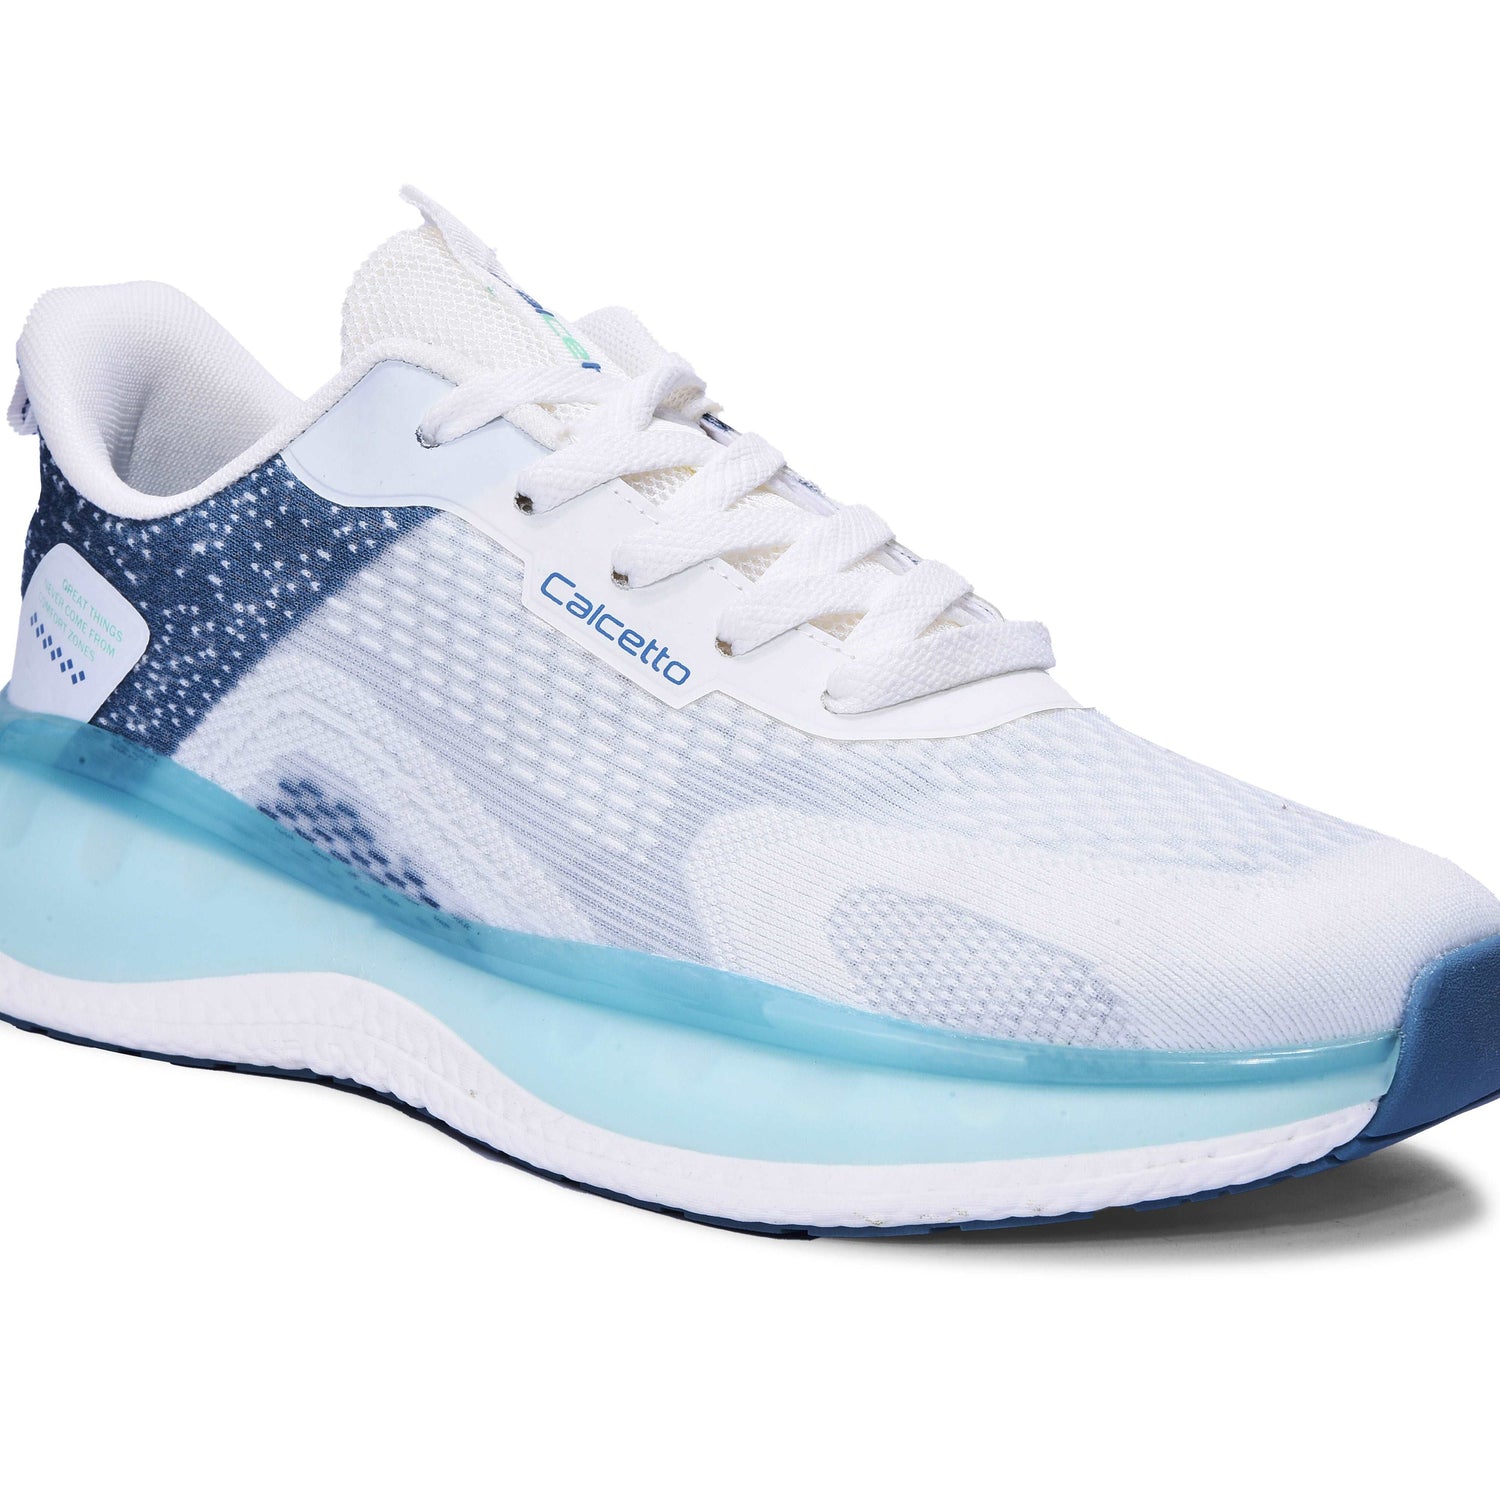 Calcetto CLT-0986 White Blue Running Sports Shoe For Men